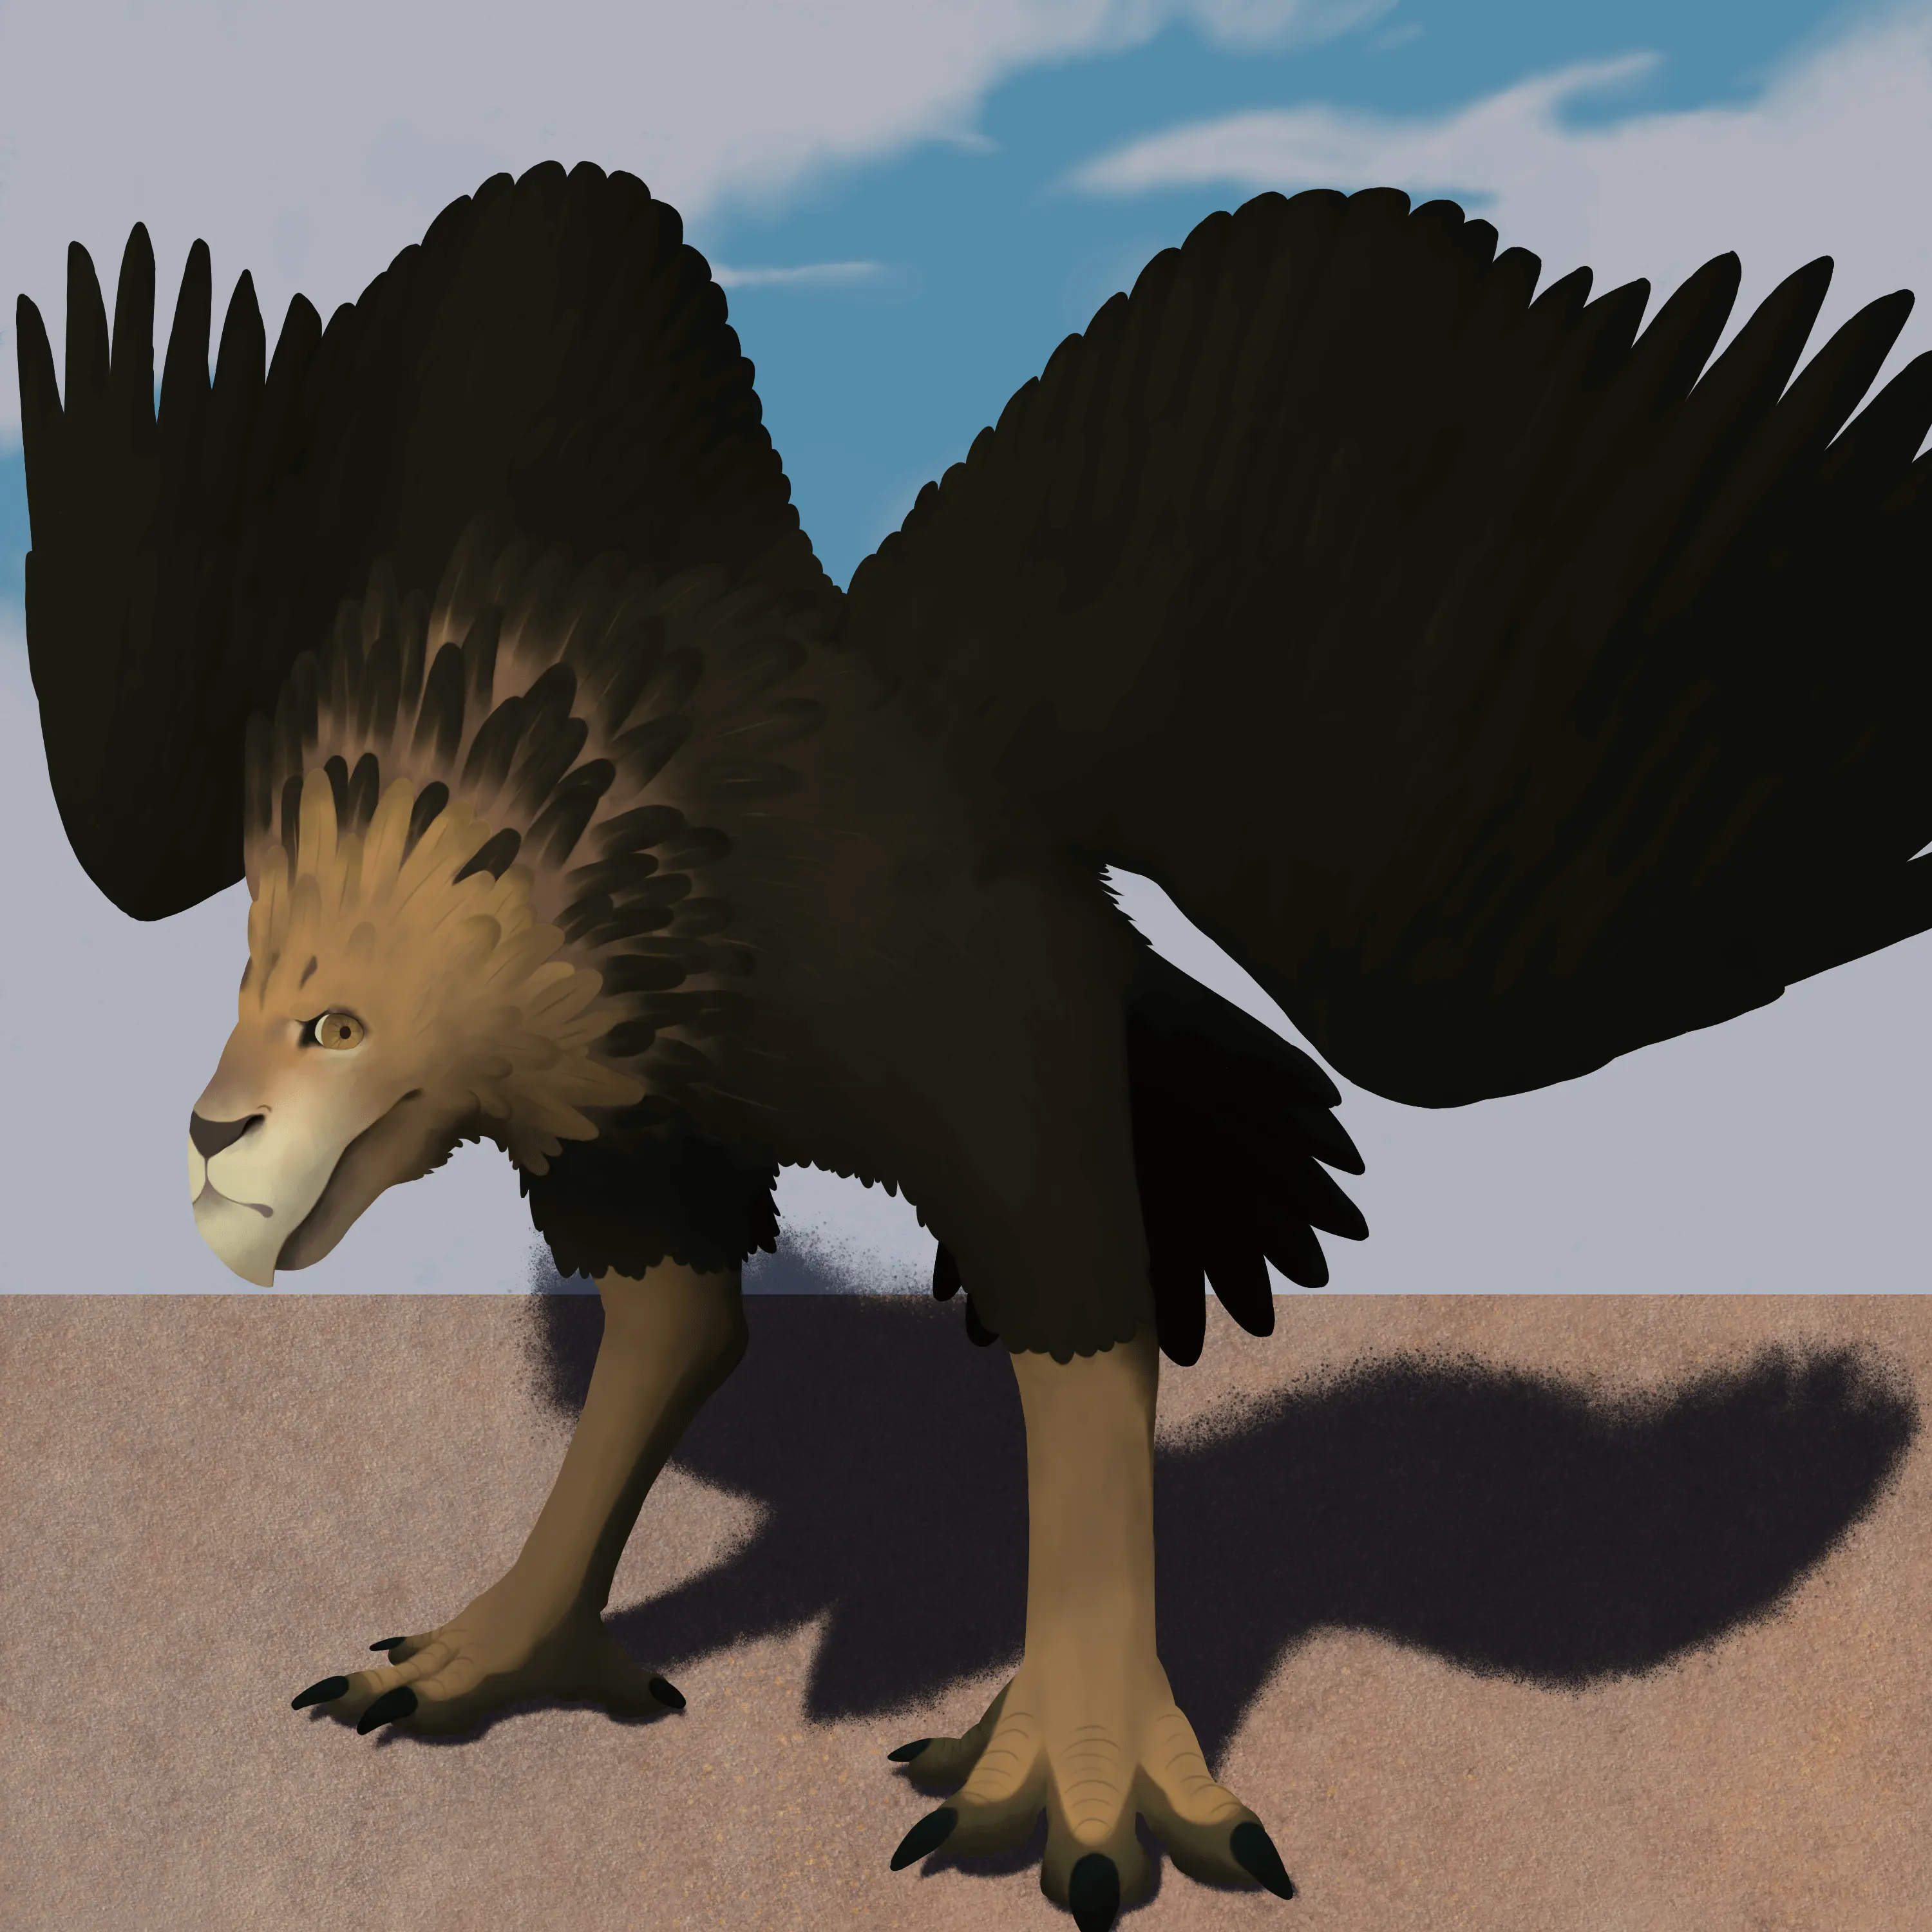 A fully colored drawing of a giant bird whose face mimics a lion's.